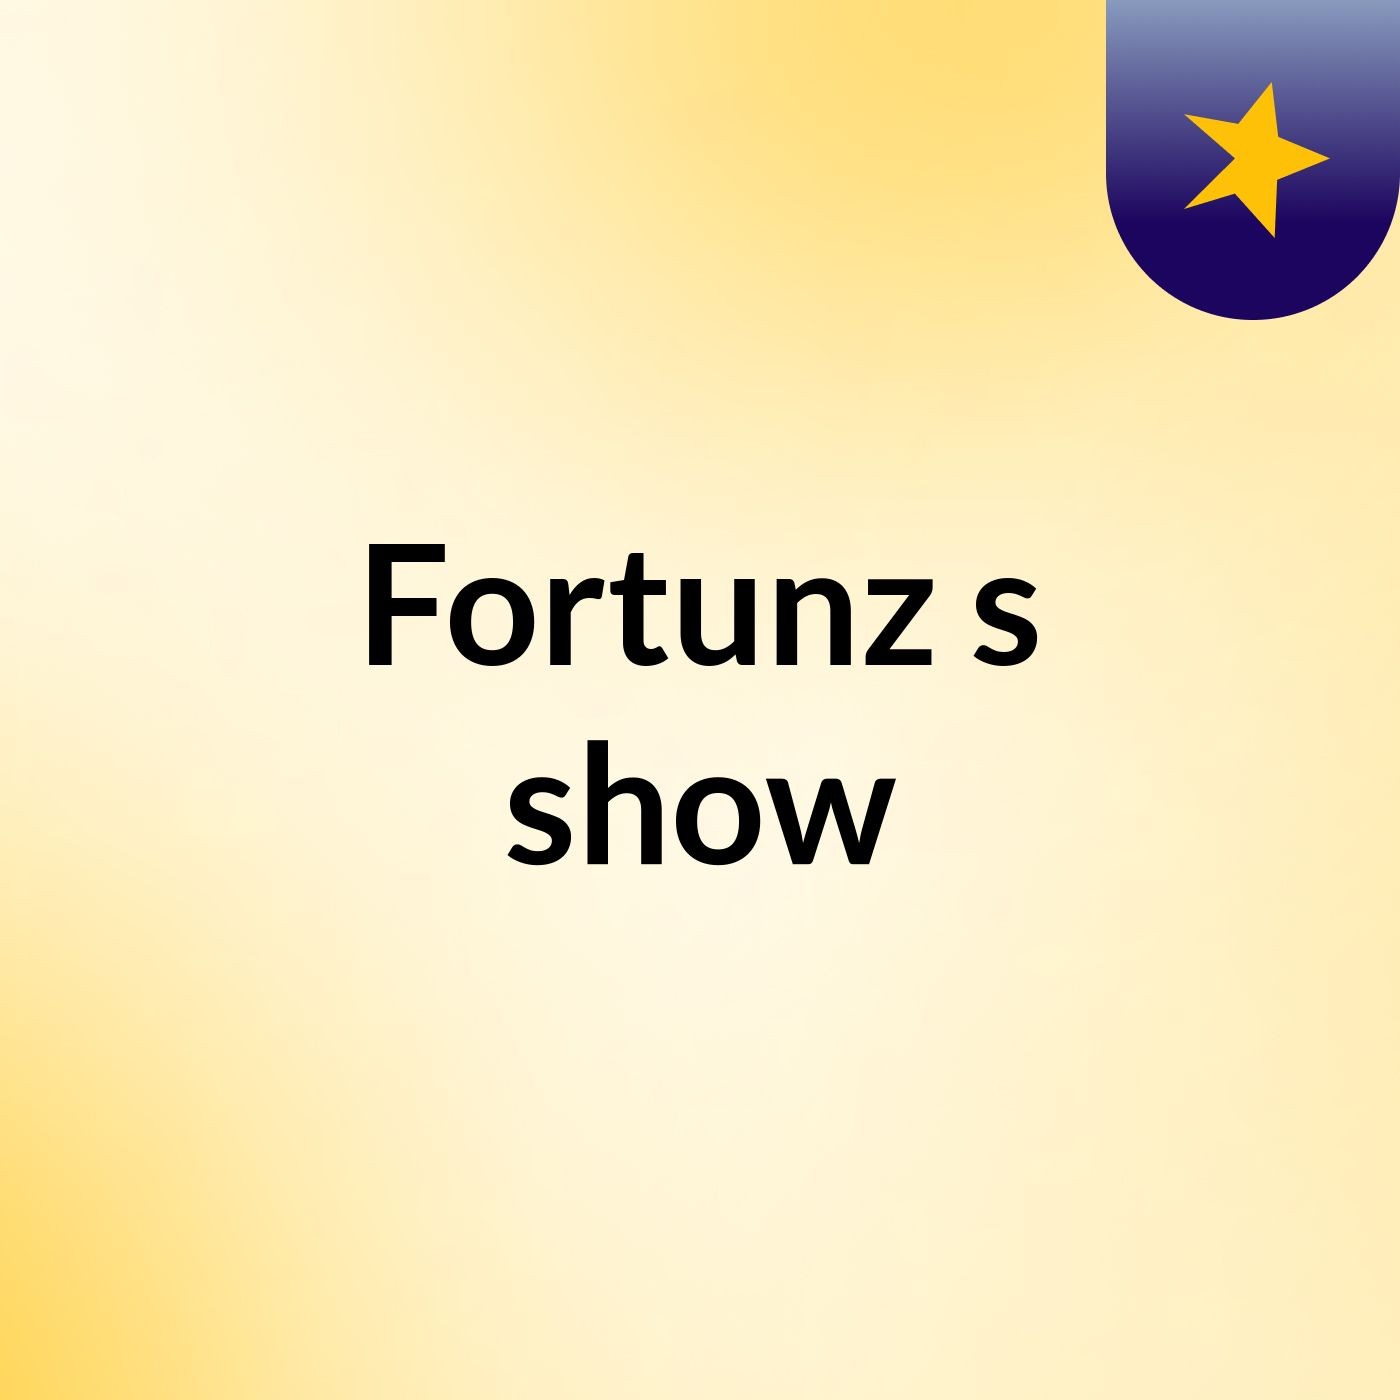 Fortunz's show